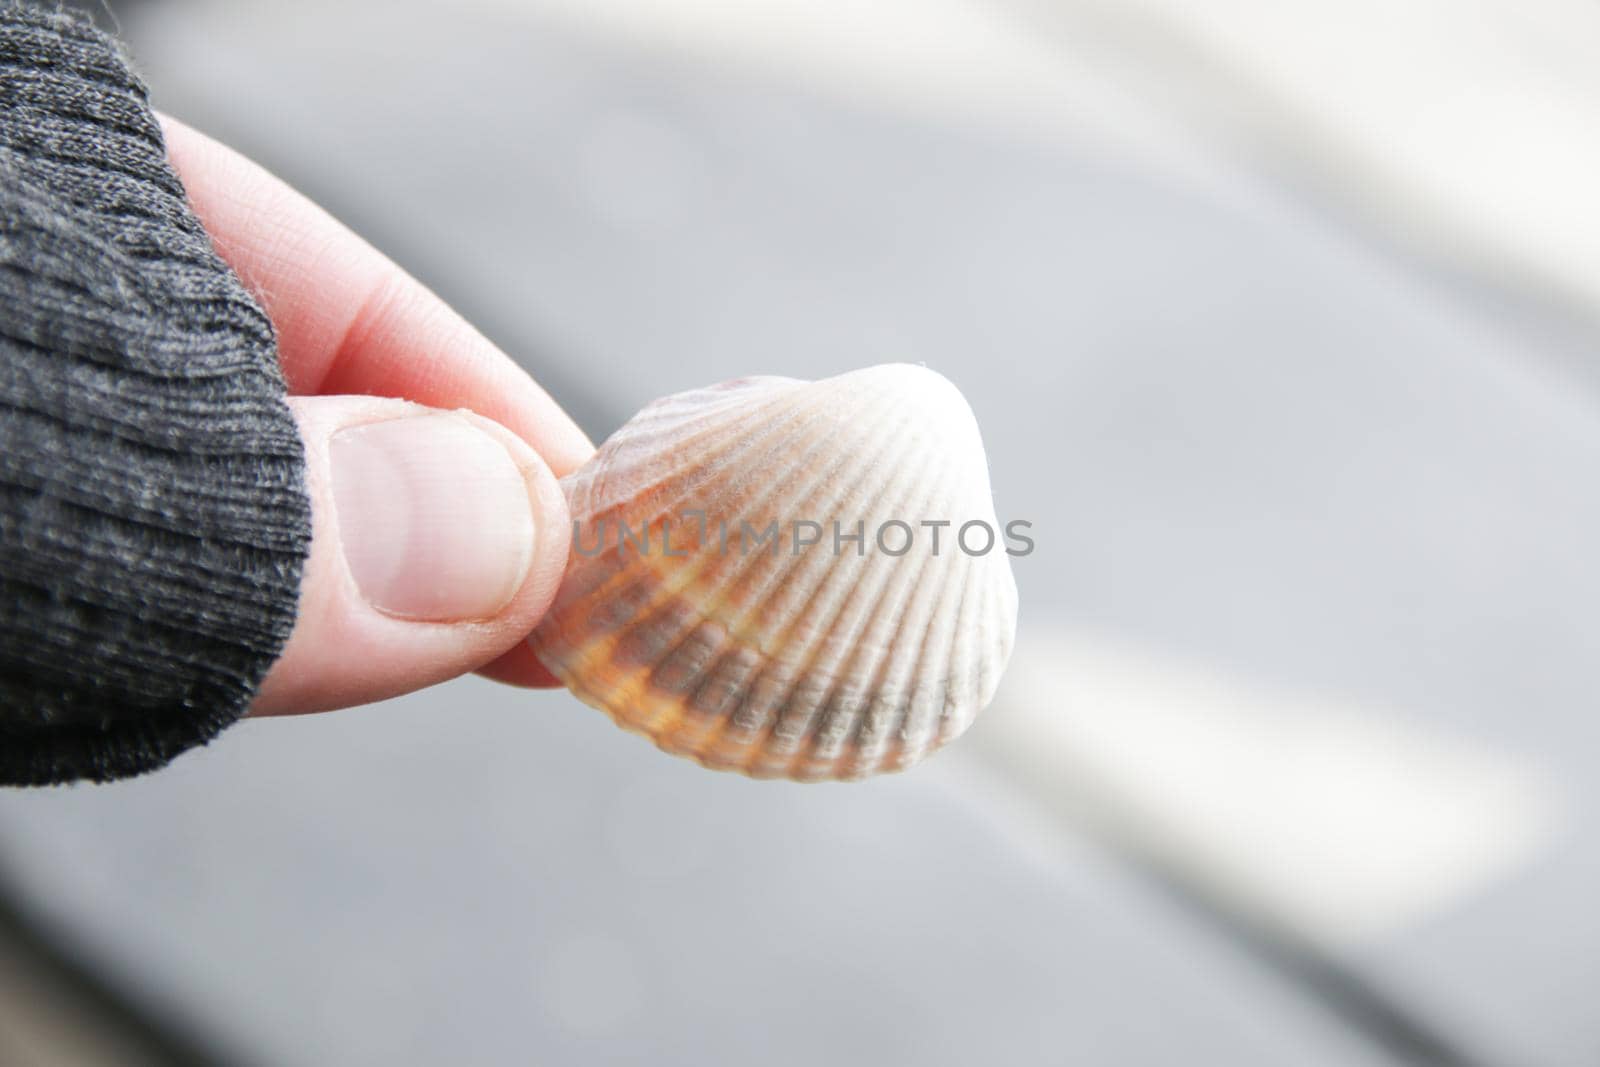 Male hand holding a seashell on a blurred background